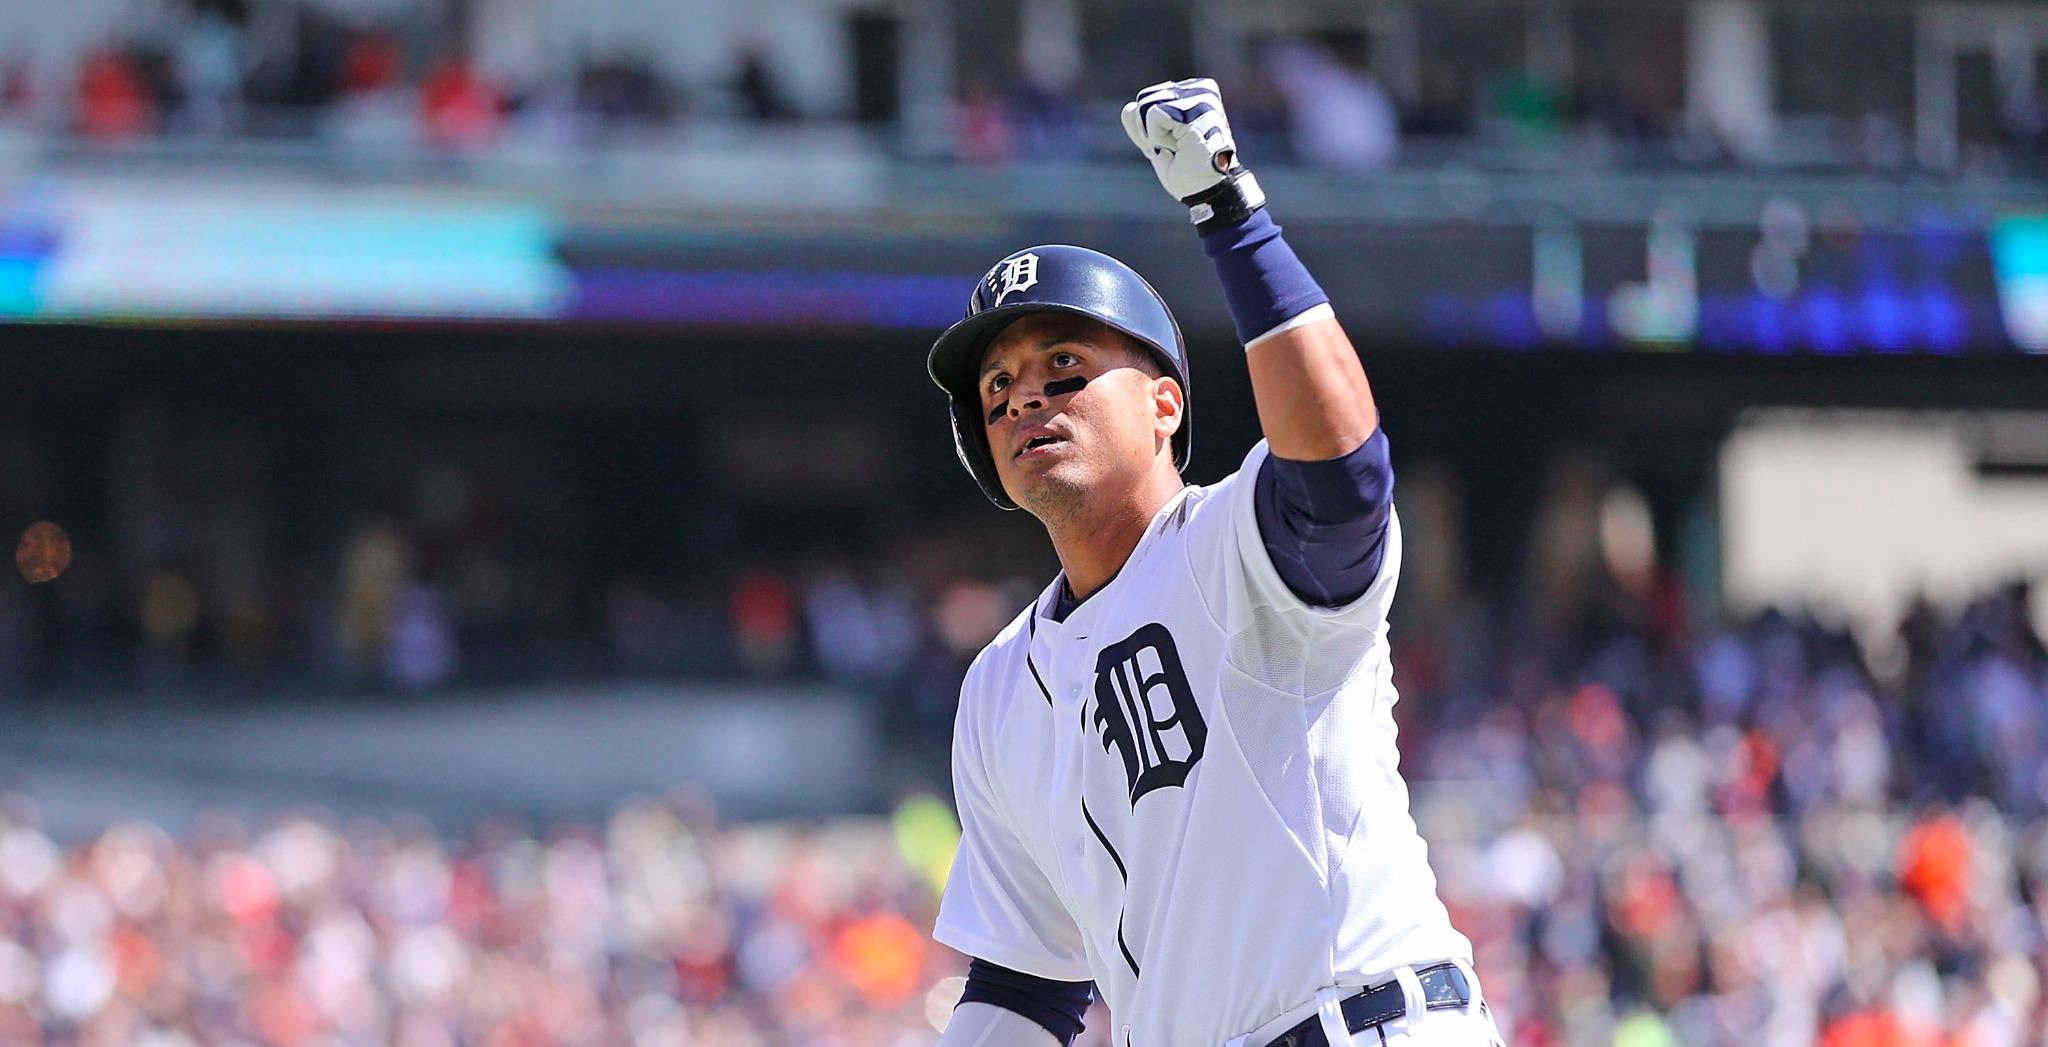 Happy 36th birthday to one of the best hitters in baseball, Victor Martinez. 